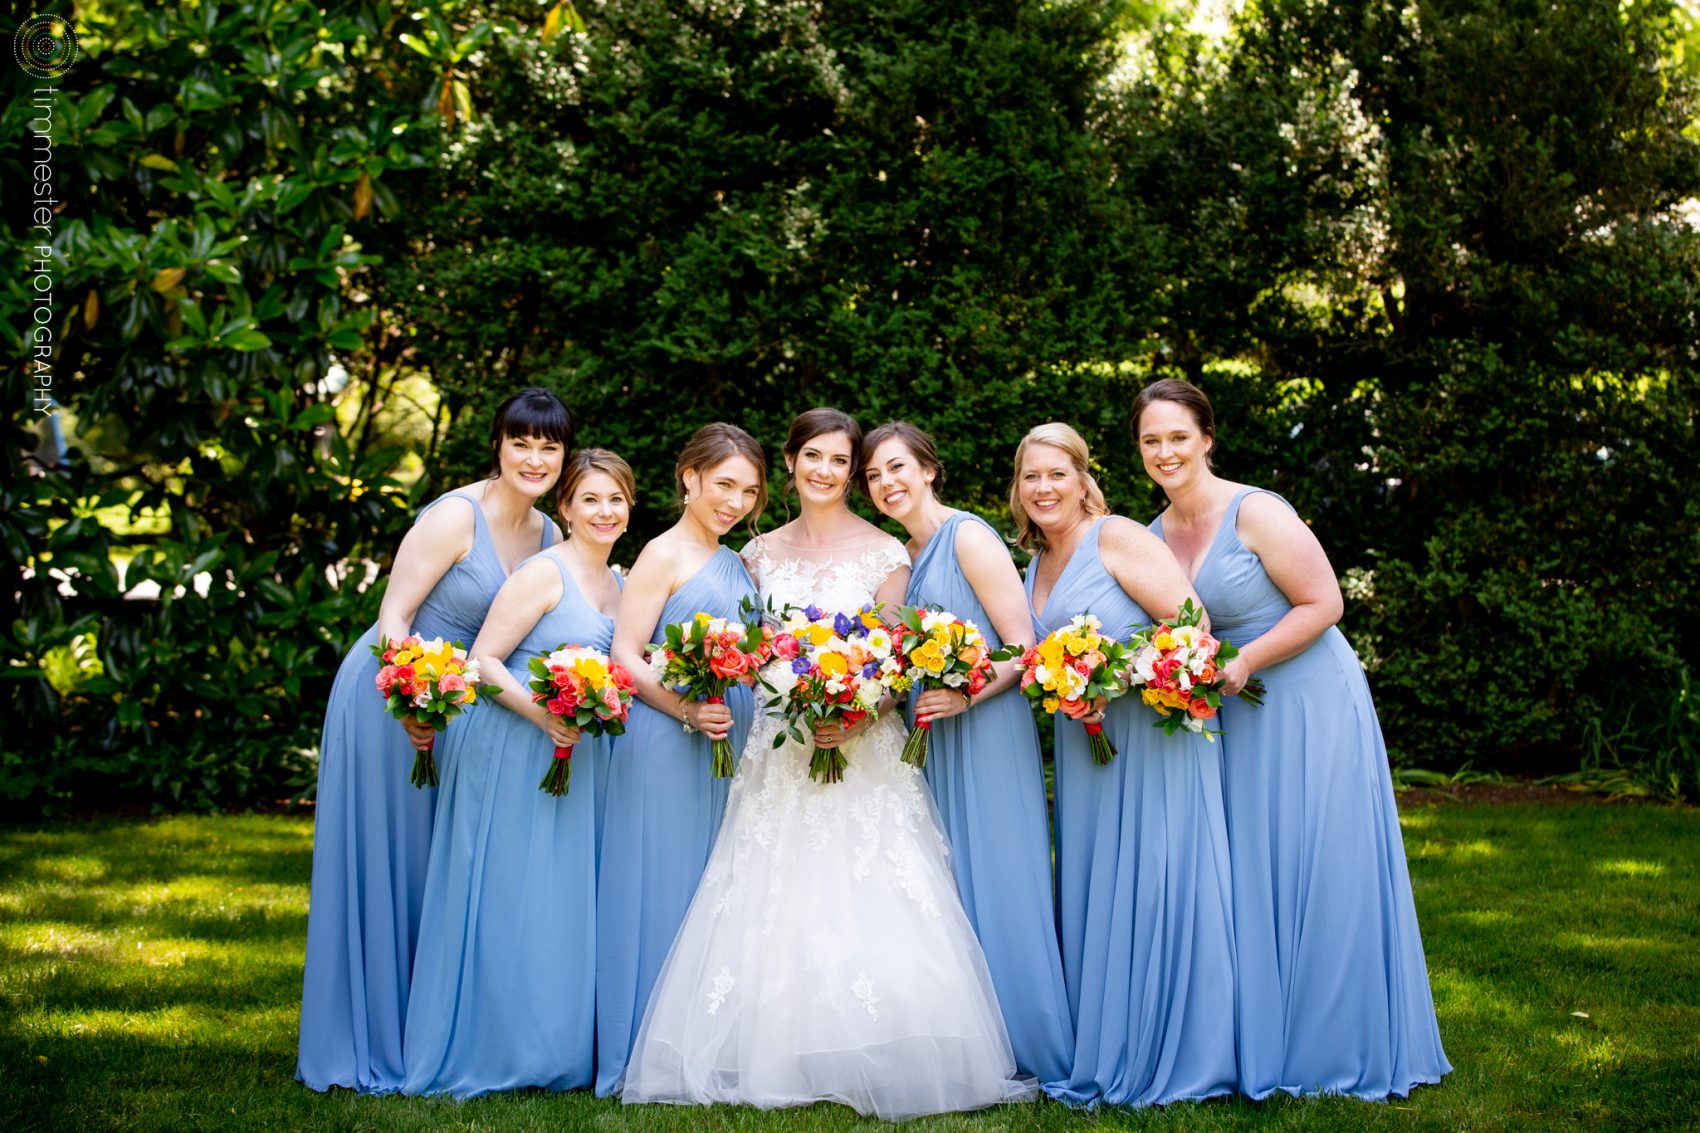 Spring wedding with bright florals for the bride and her bridal party in Washington, DC